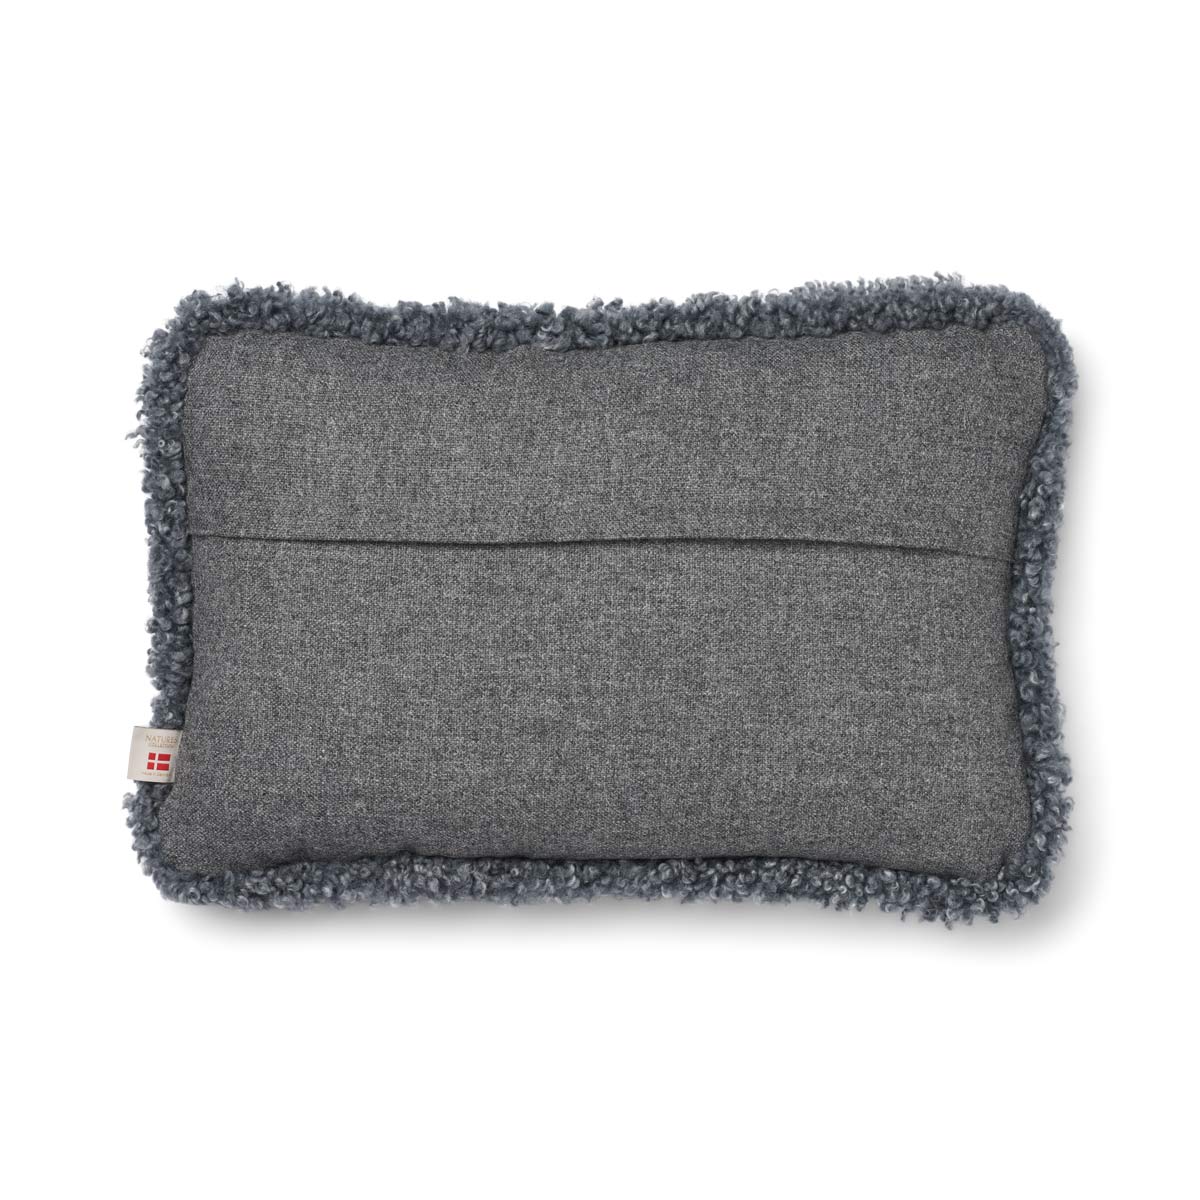 Classic Collection, Doublesided 100 %  Wool Cushion and SW New Zealand Sheepskin Trimming. Size: 34x52 cm.